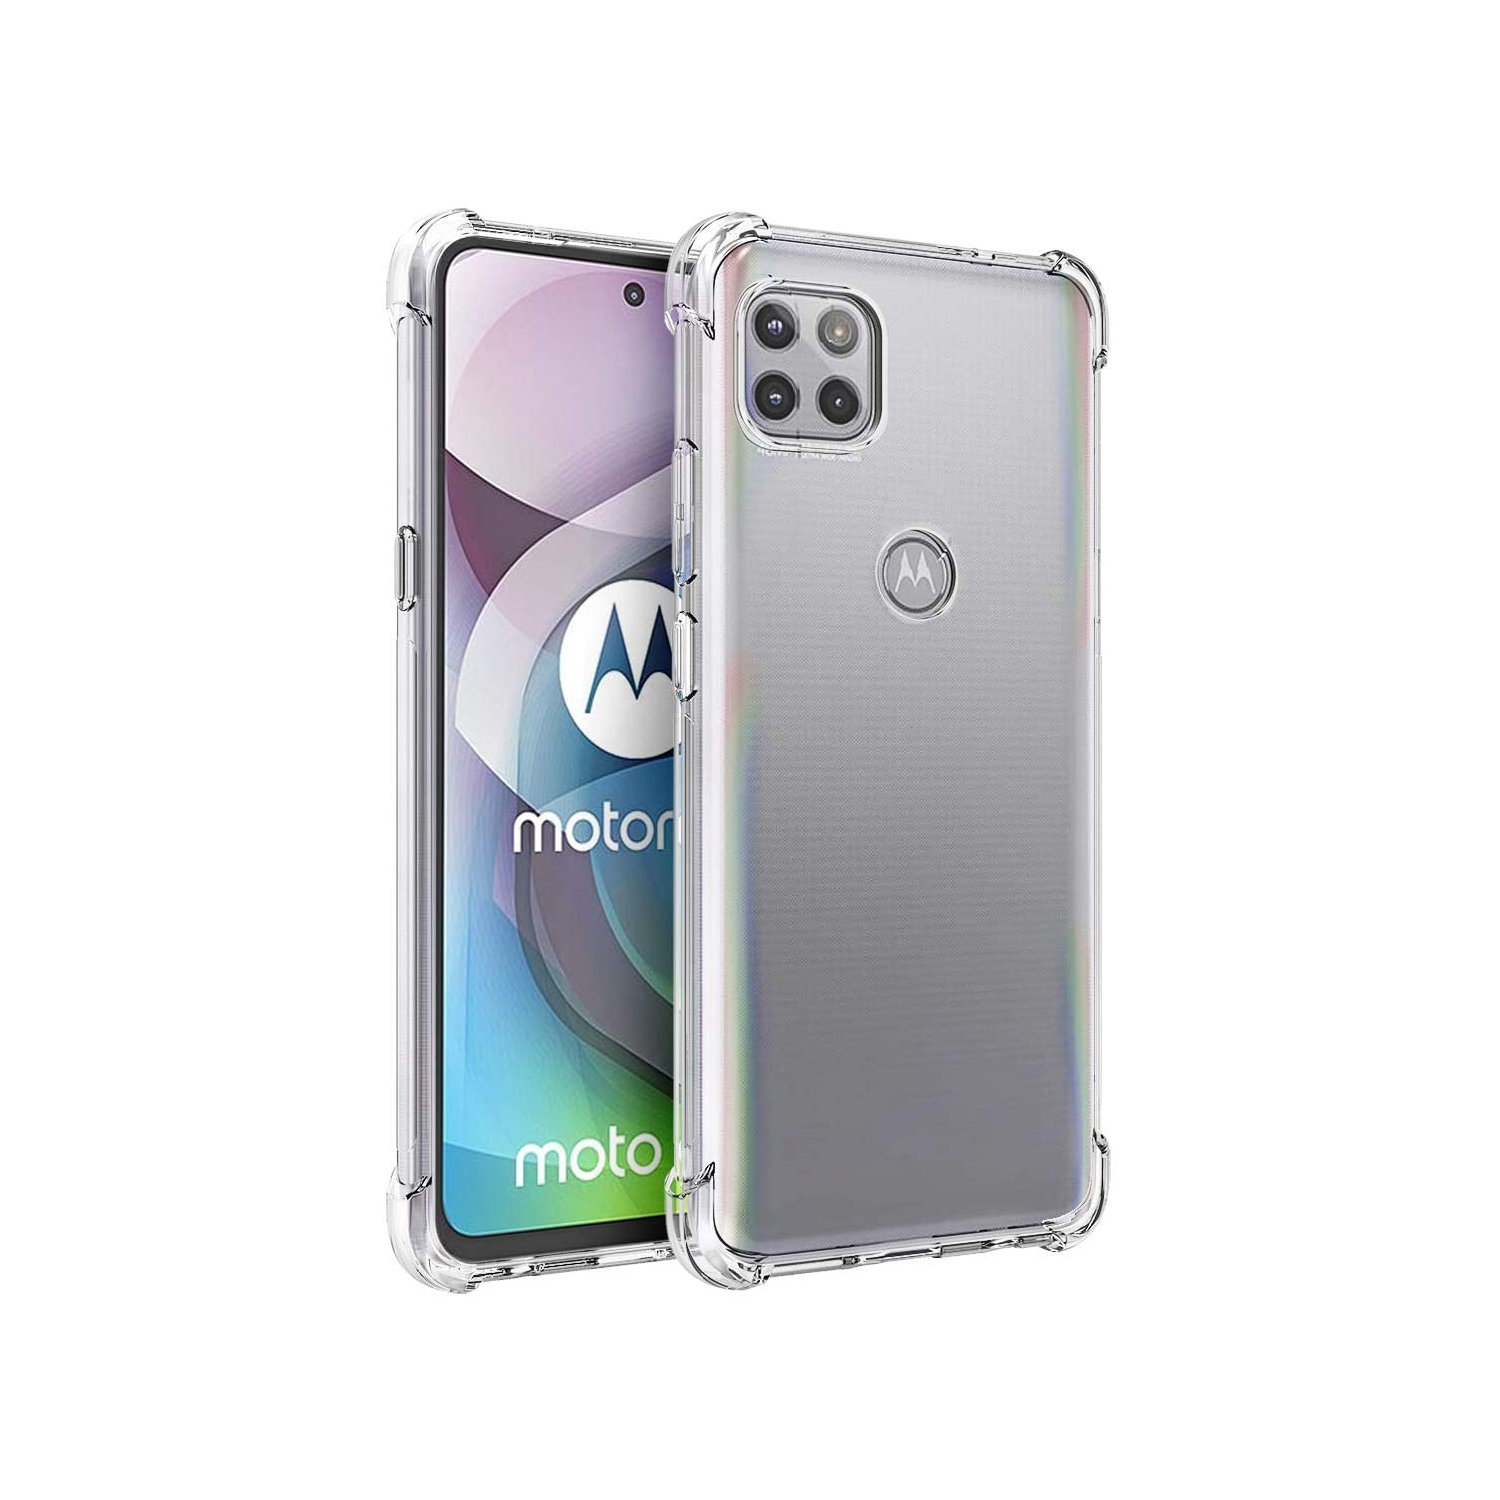 【CSmart】 Ultra Thin Soft TPU Silicone Jelly Bumper Back Cover Case for Motorola Moto One 5G Ace, Clear